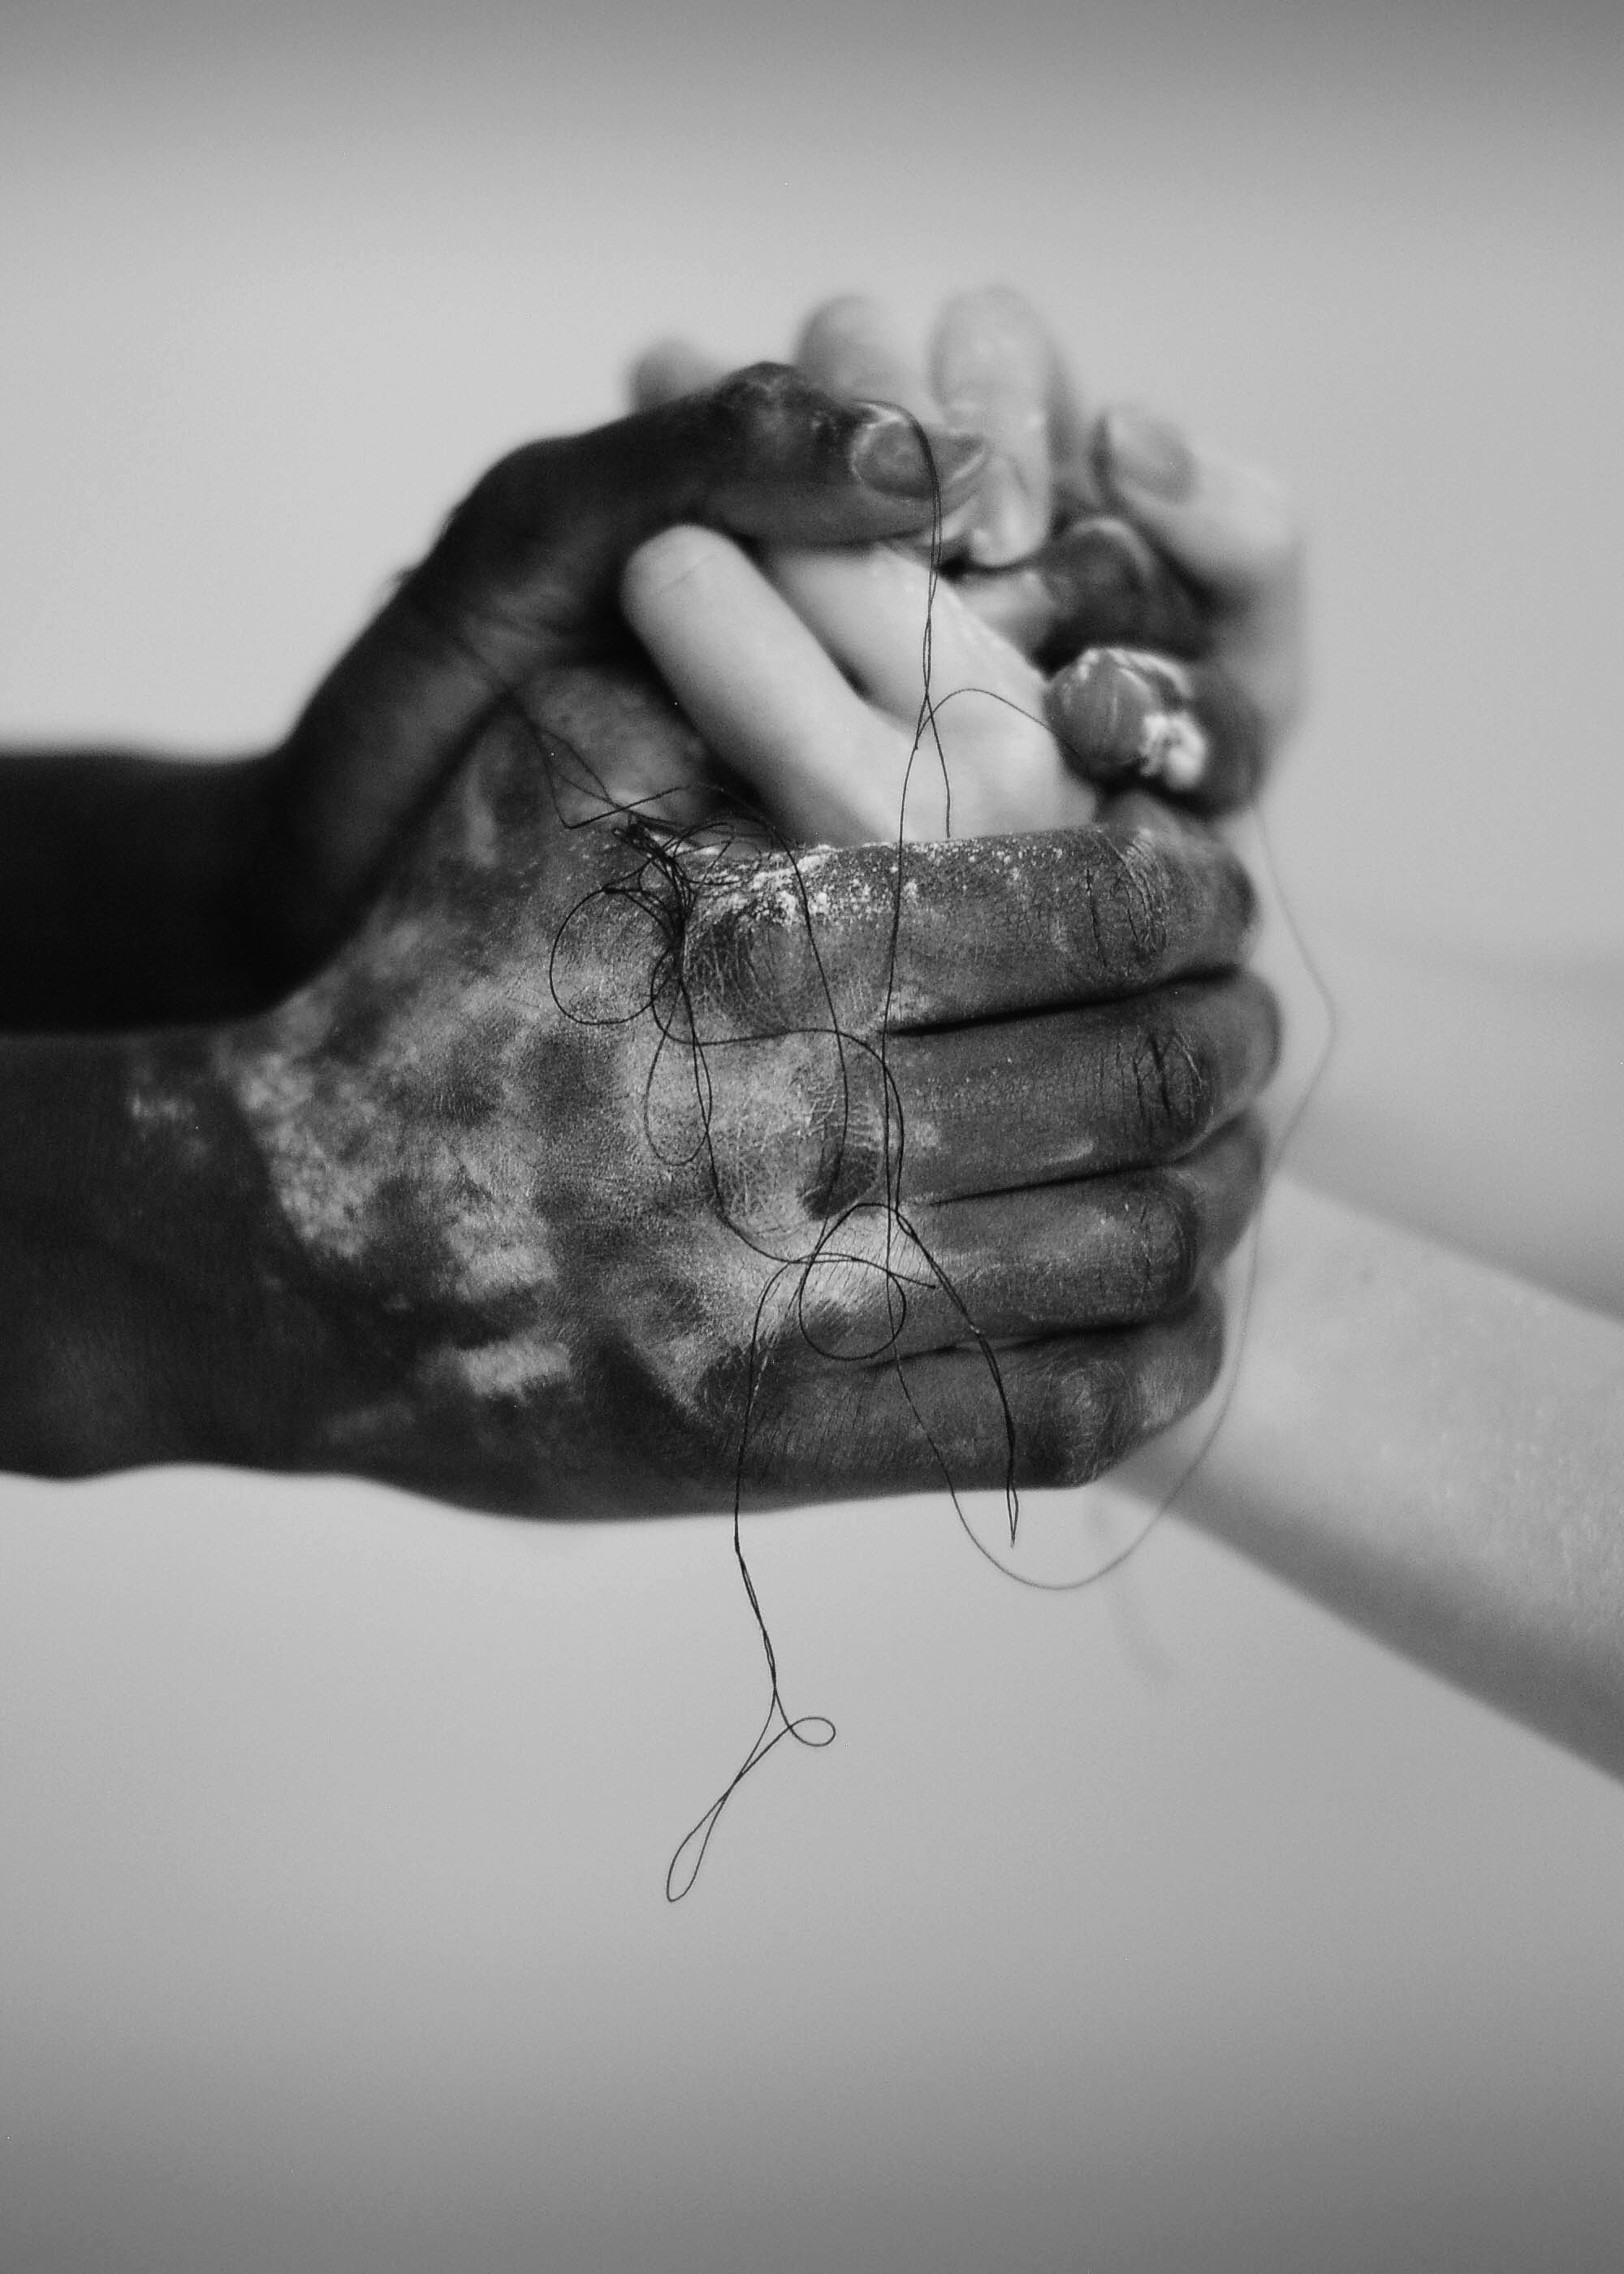 touching, communication, minimalism, hands, bw, chb, thread, touch, connection